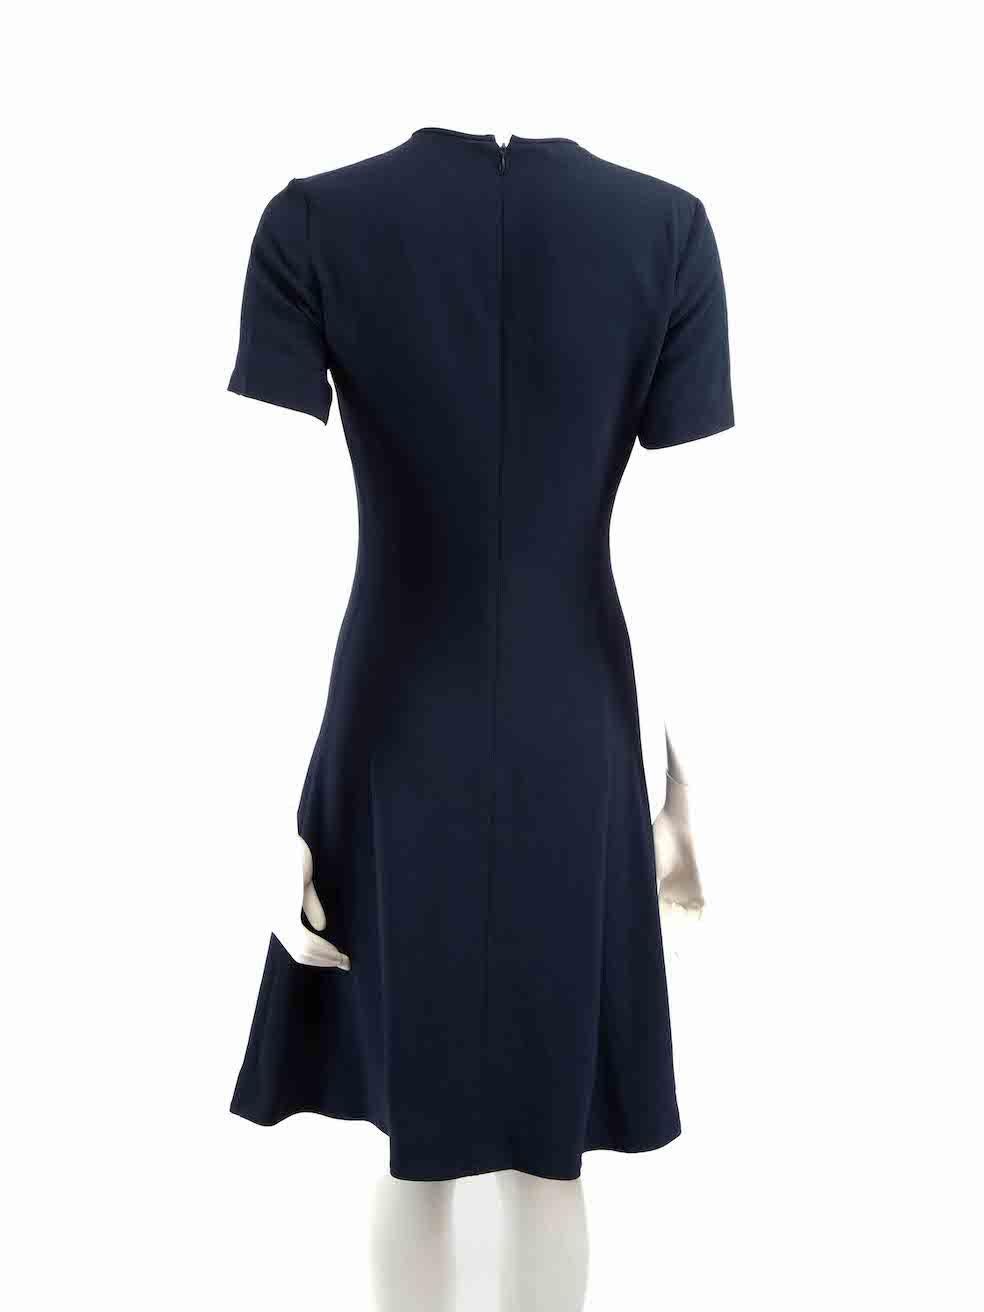 Stella McCartney Blue Flared Skirt Dress Size XXS In Good Condition For Sale In London, GB